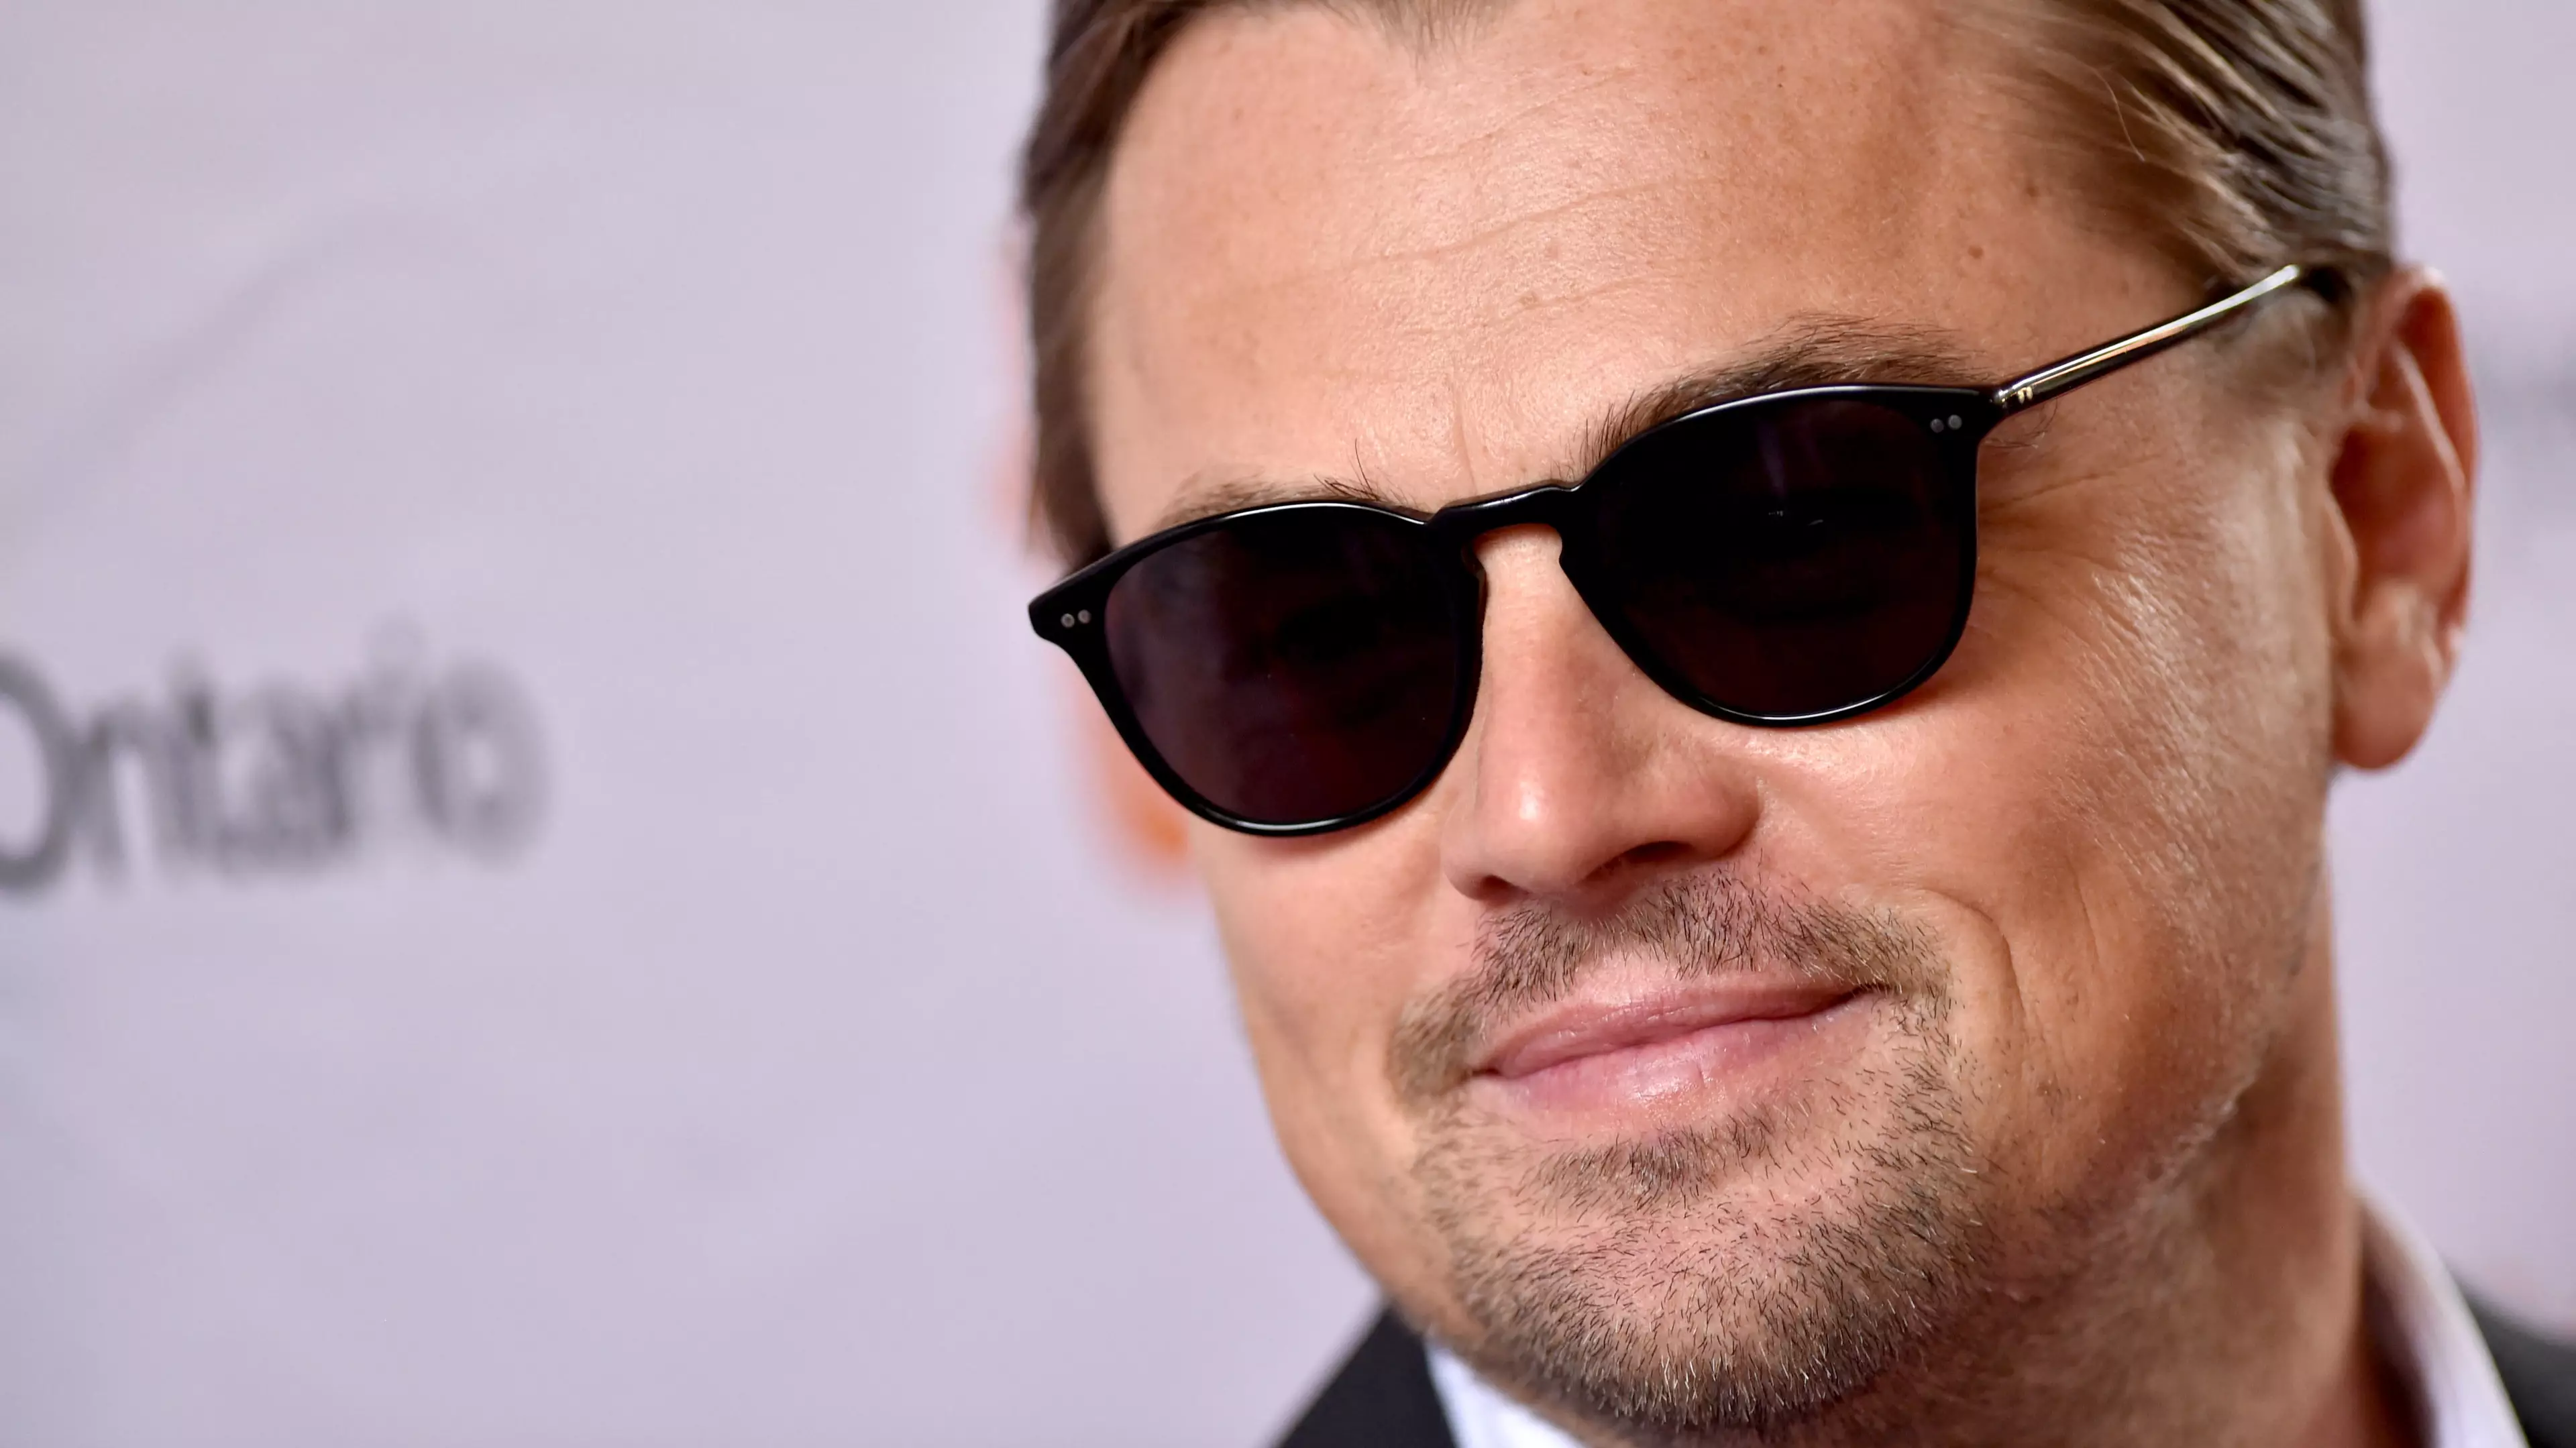 Fans Can't Get Enough Of Leonardo DiCaprio's Awkward Dancing